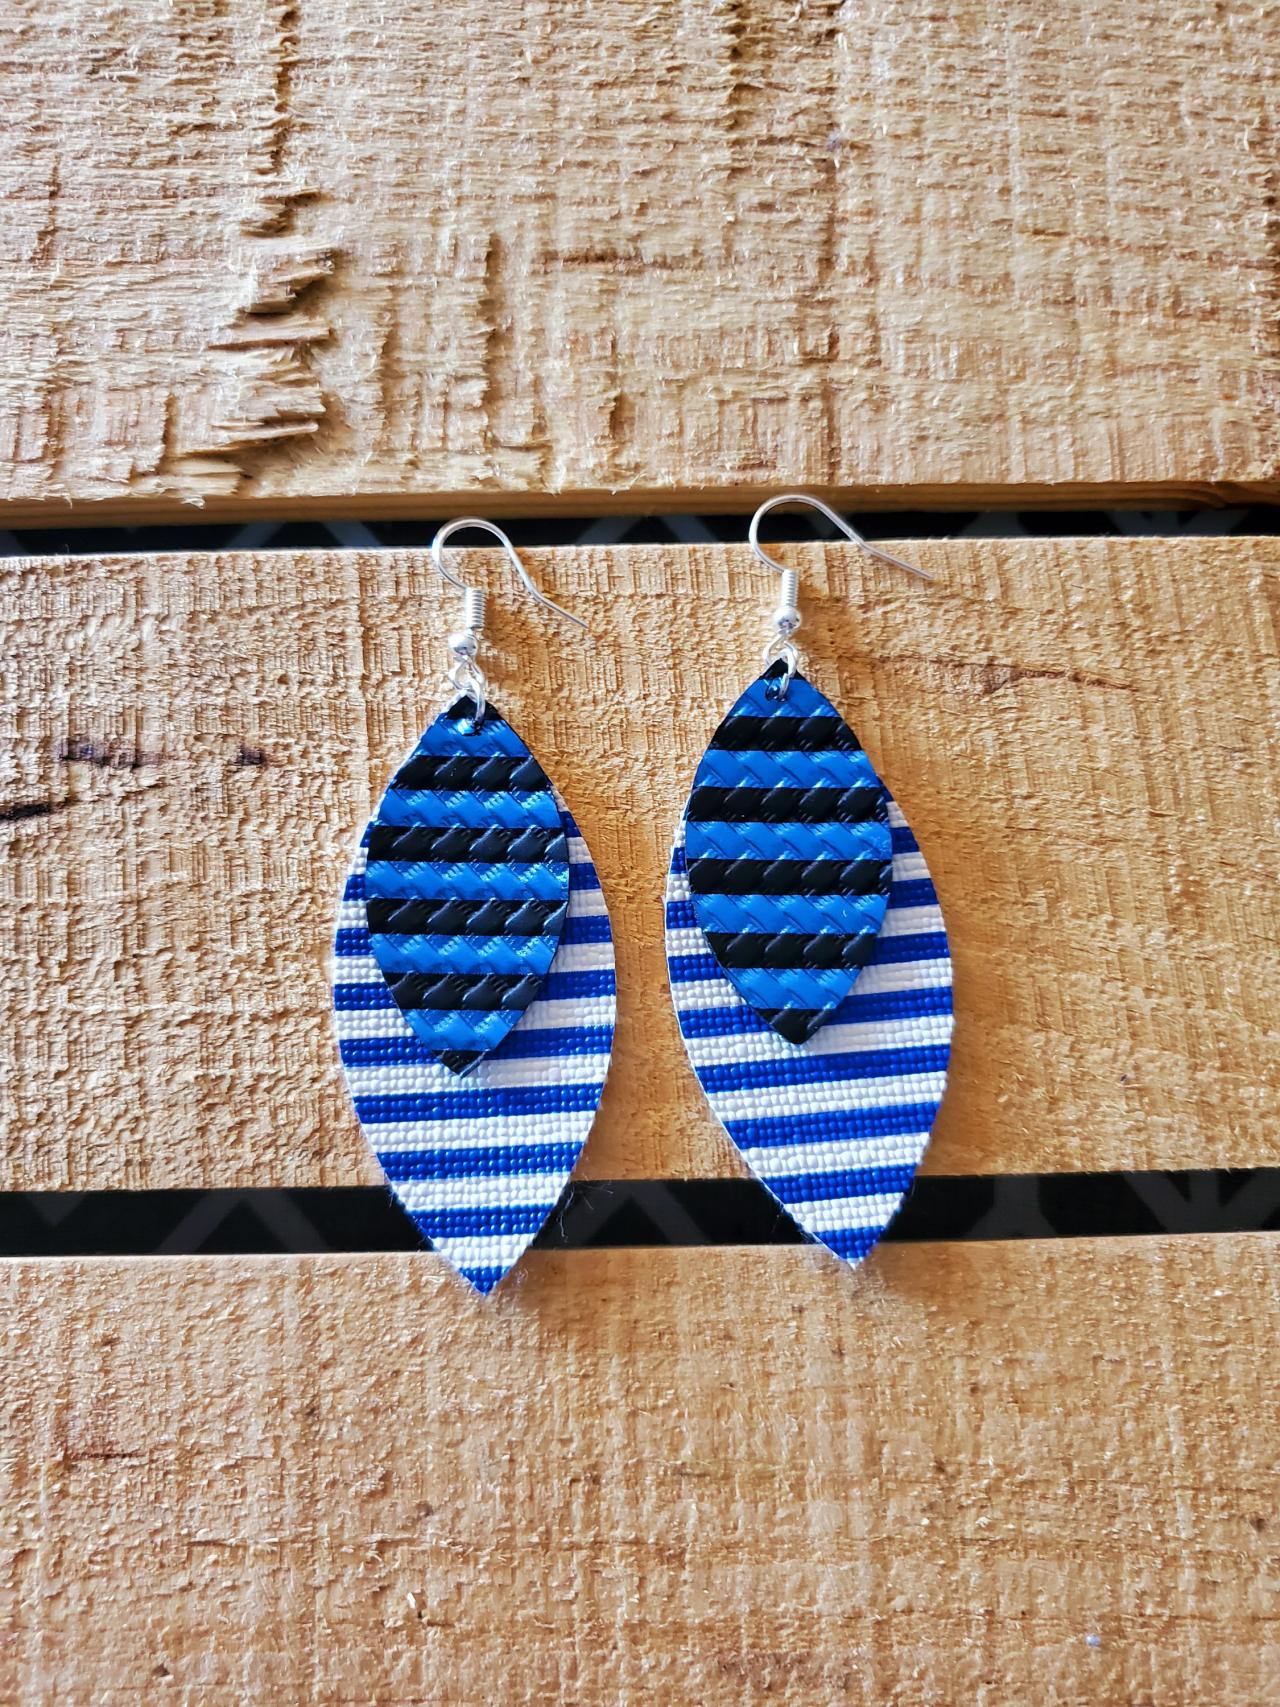 Blue And White Striped Leather Earrings, Blue And White Leather Earrings, Trendy Leather Earrings, Statement Earrings, Layered Earrings